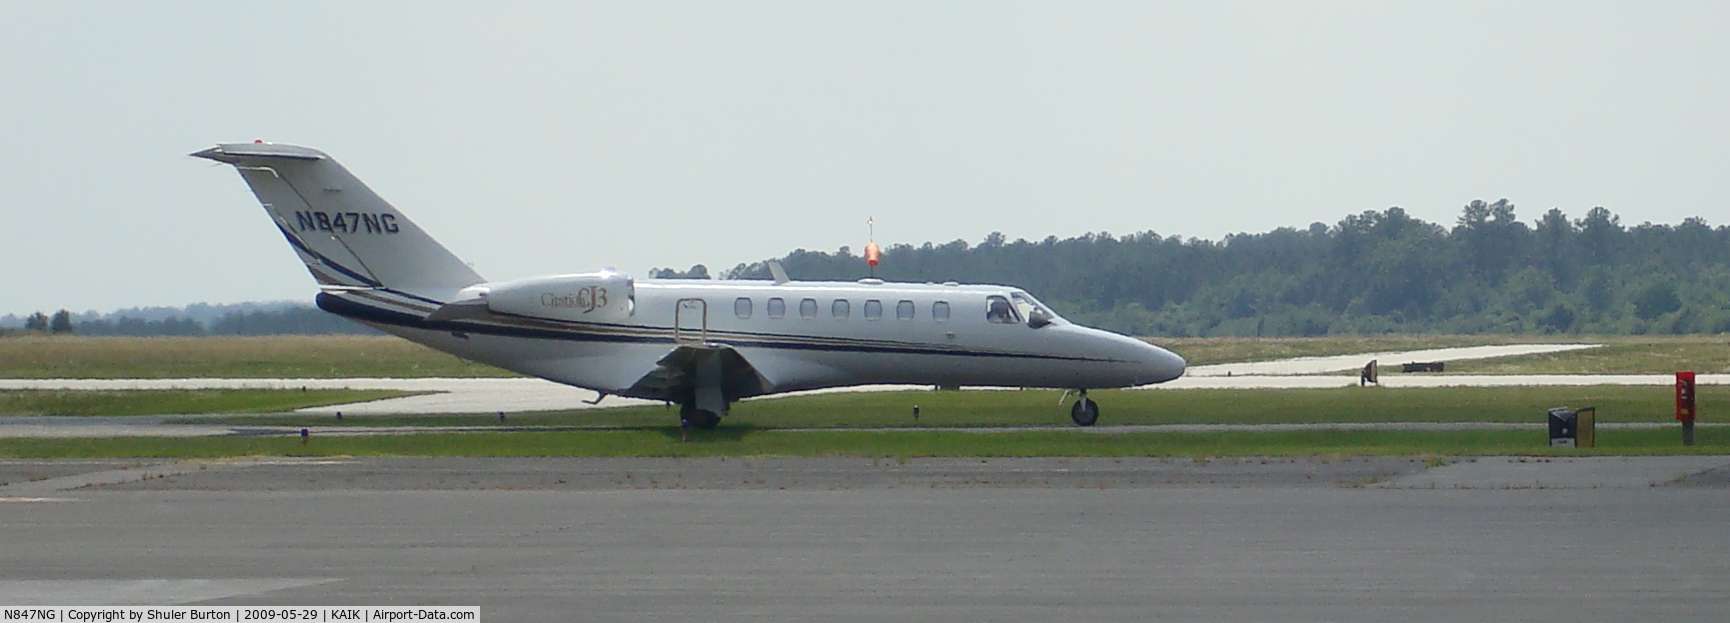 N847NG, 2007 Cessna 525B C/N 525B-0144, On taxiway for departure 3:30 pm 5-29-2009